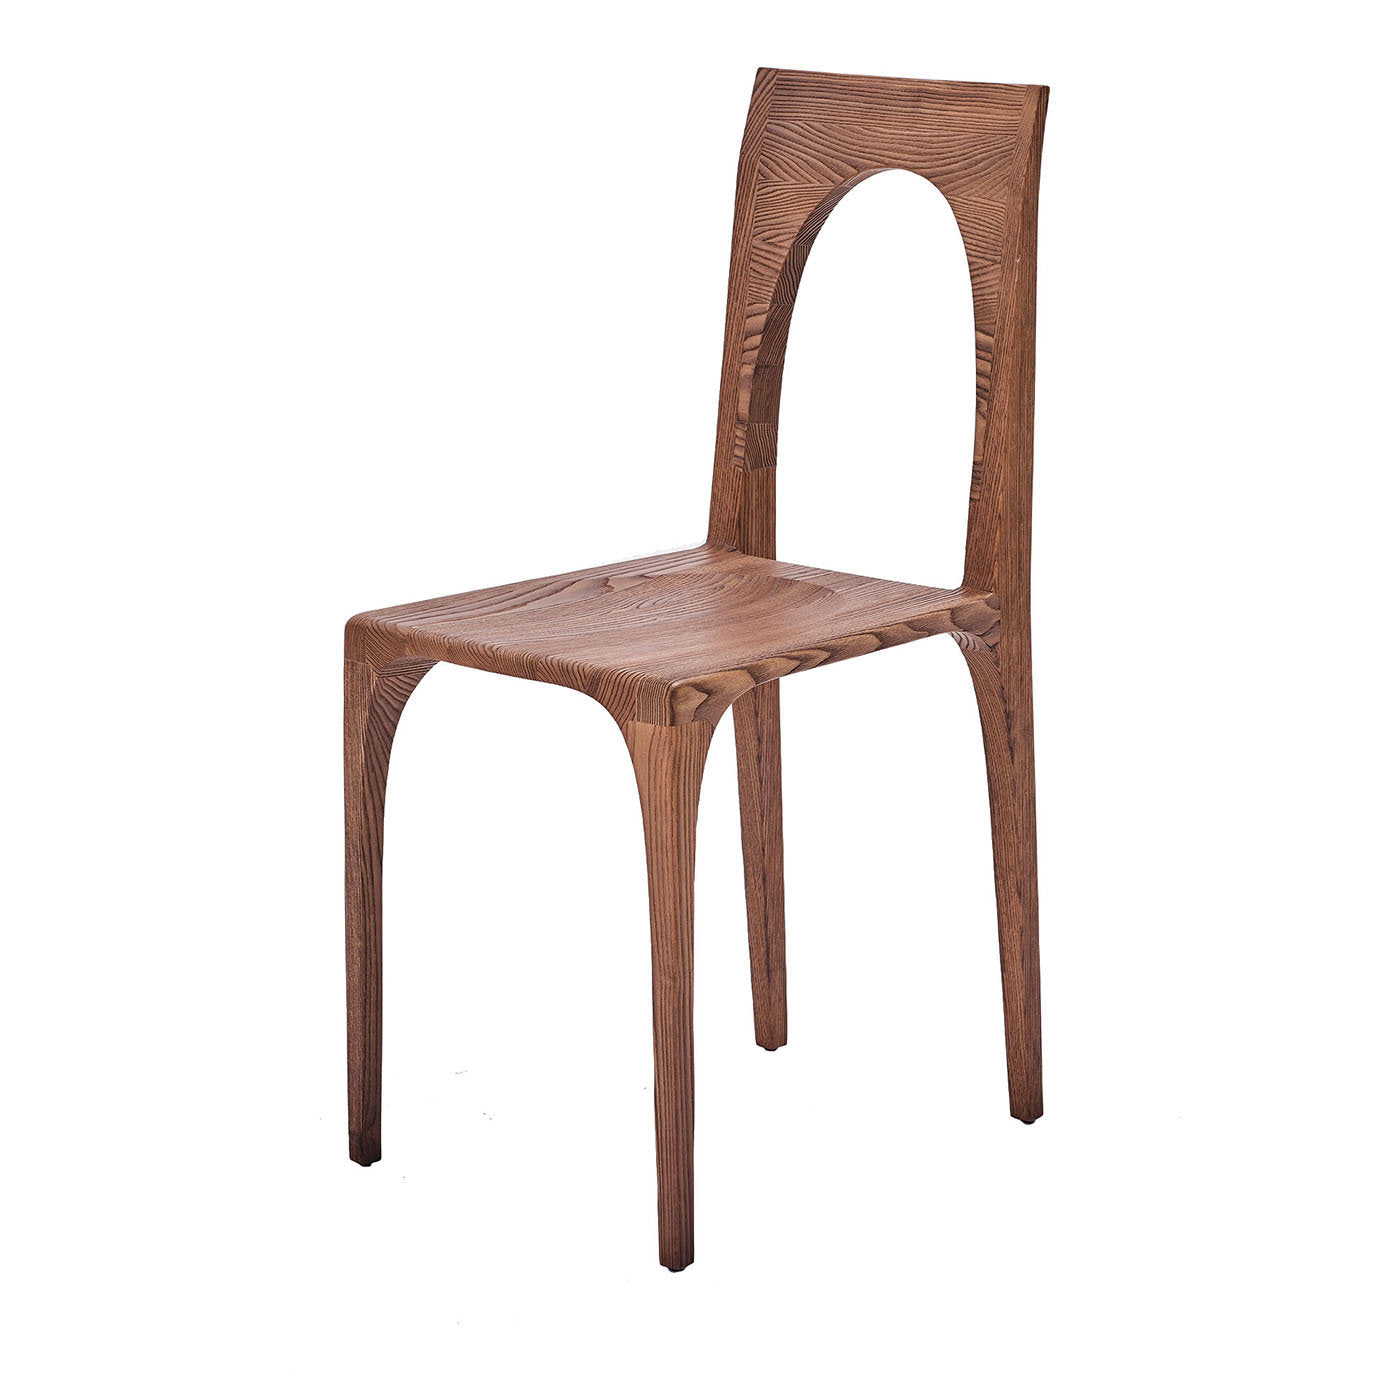 Gio Set of 2 Walnut Stained Chairs  - Main view